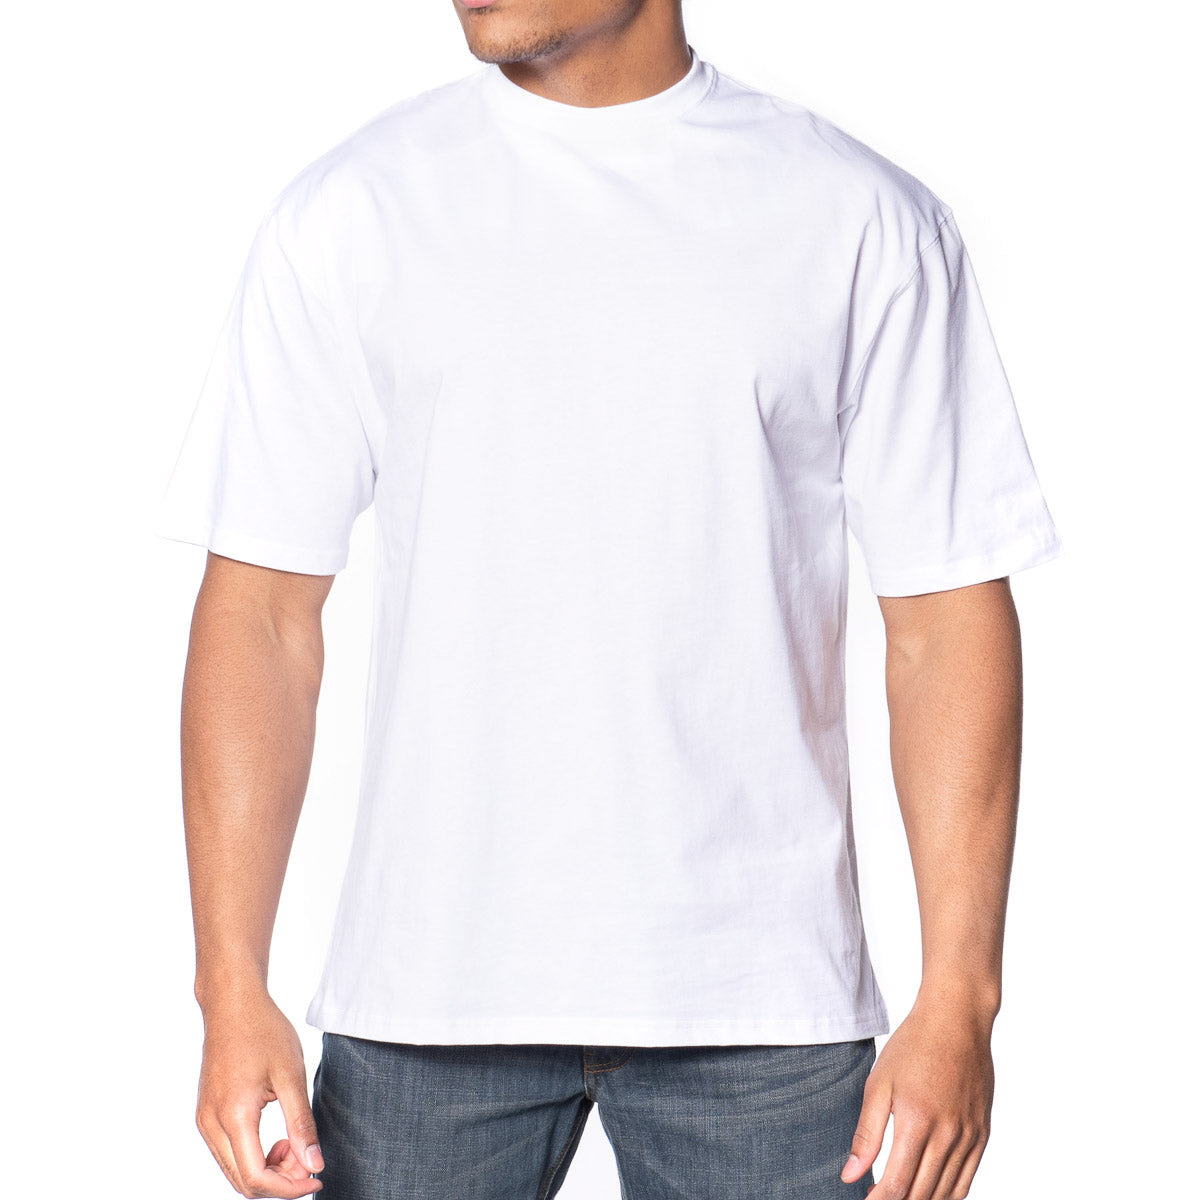 Tall Men's Classic White Crew Neck T-Shirts, 6 Pack